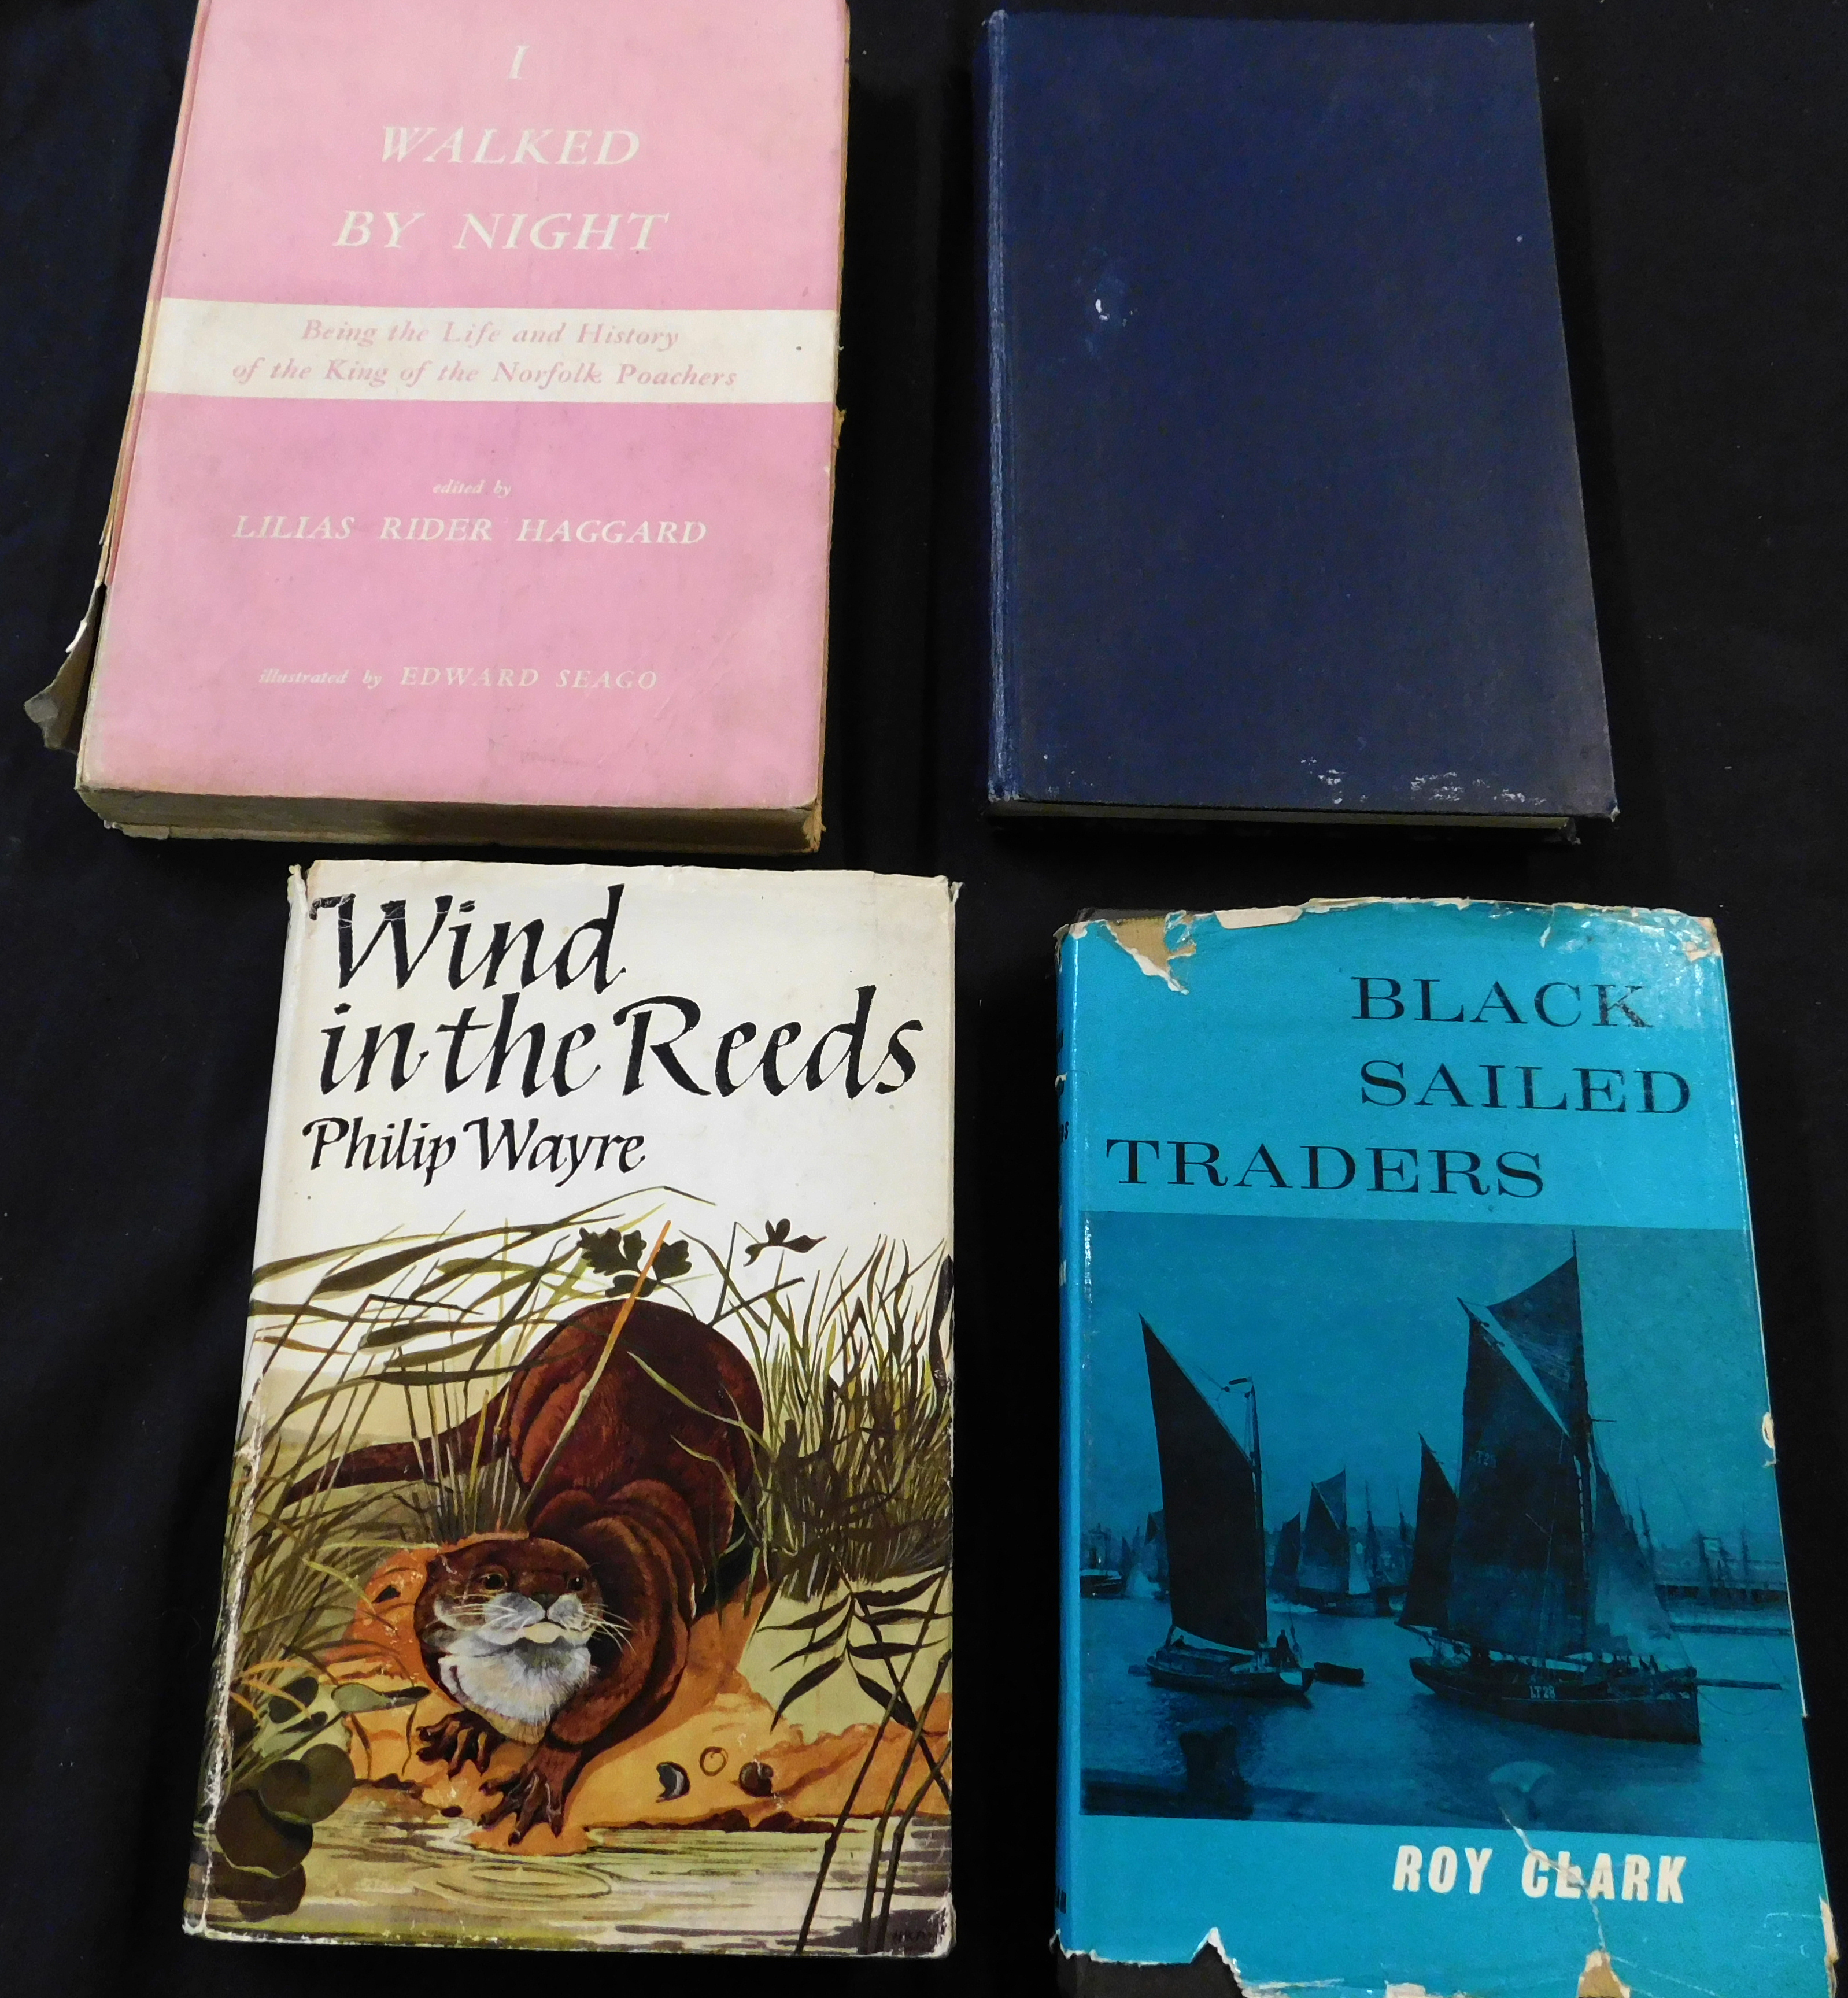 ROY CLARK: BLACK-SAIL TRADERS, THE KEELS AND WHERRIES OF NORFOLK AND SUFFOLK, London, Putnam,